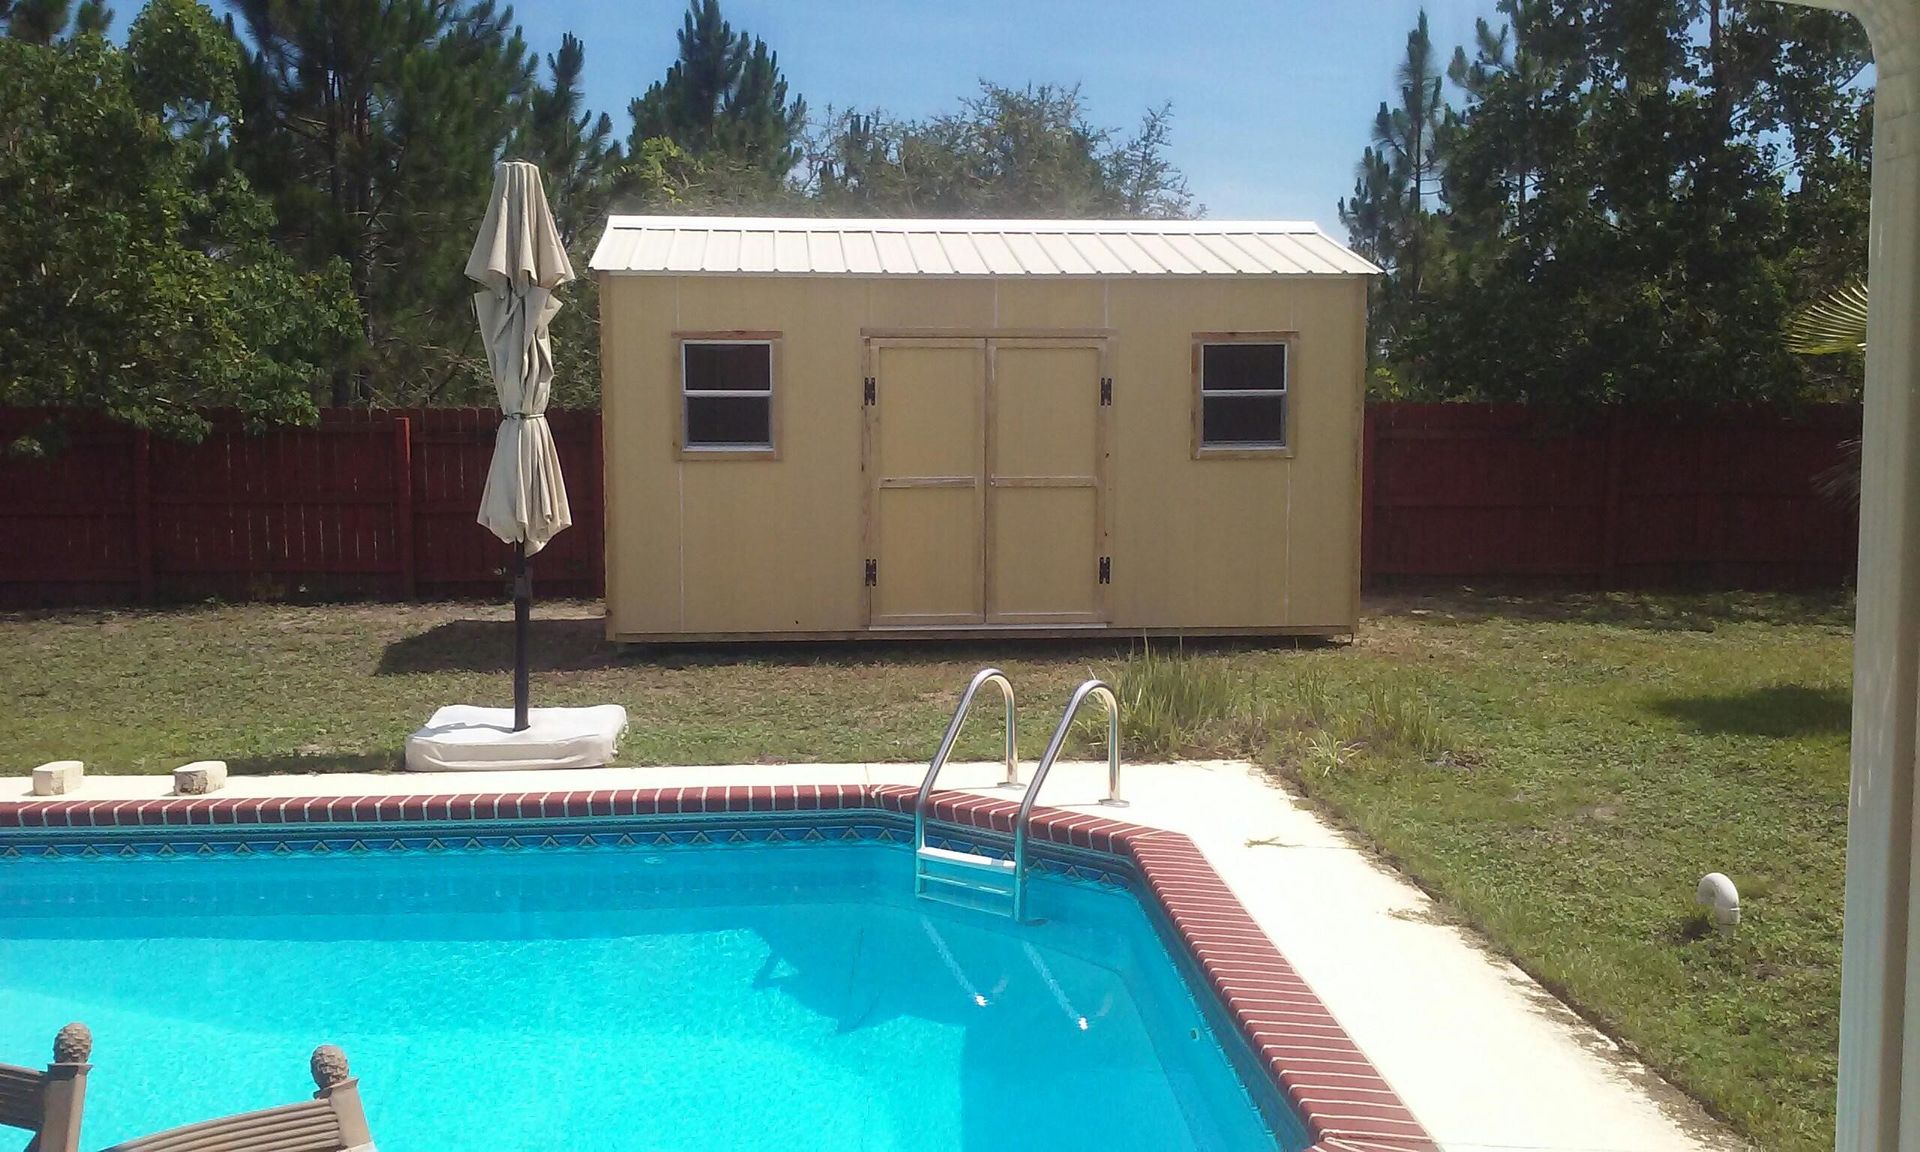 A shed sits next to a large swimming pool